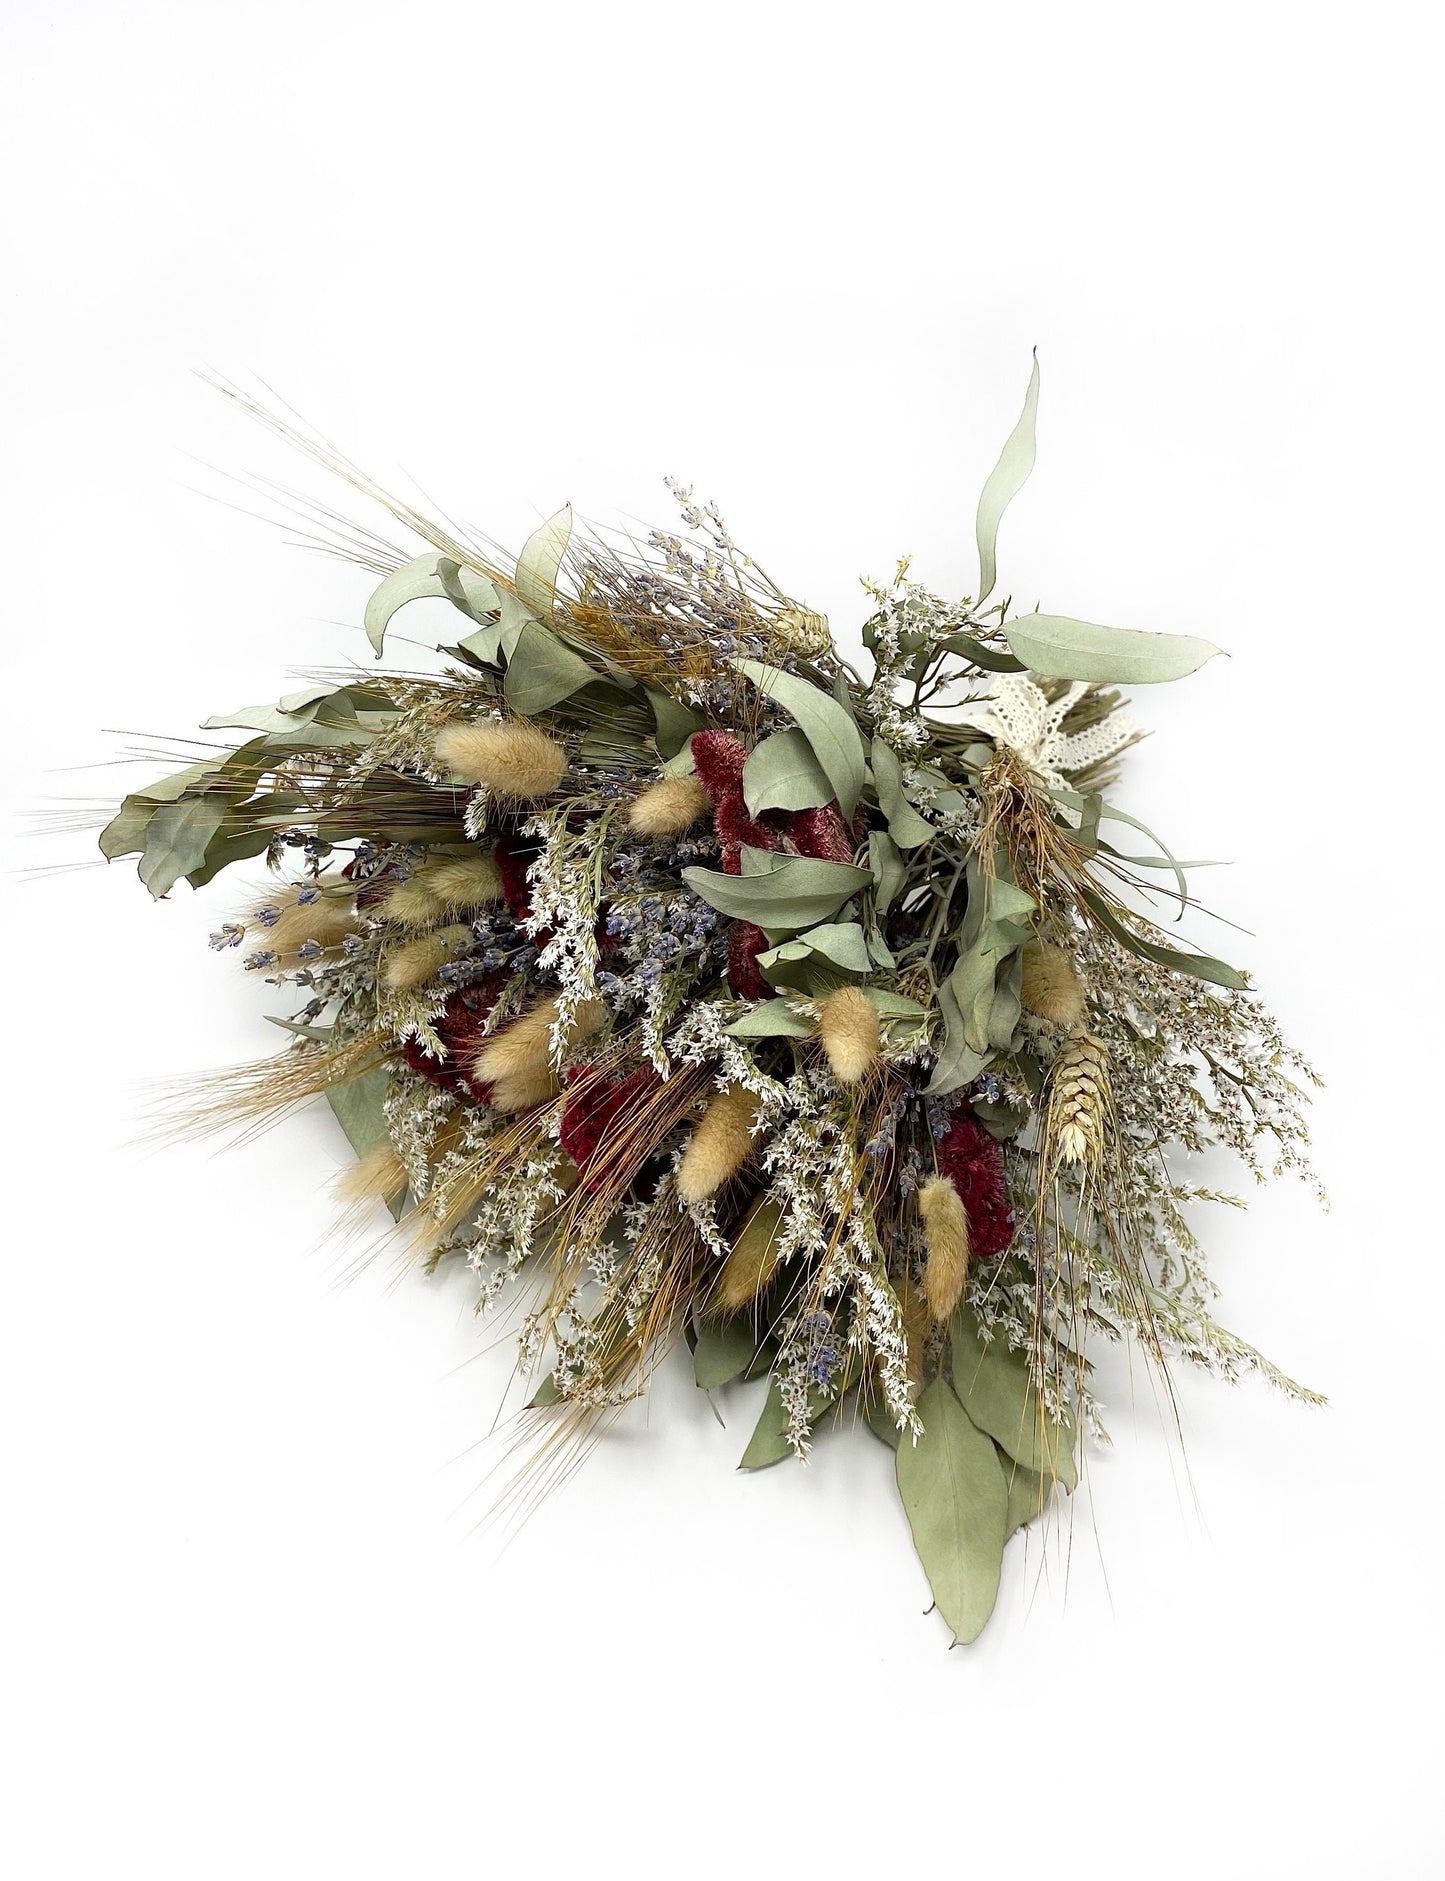 Wedding Bouquet, Floral Arrangement, Dried Flowers, Preserved, Greenery, Dried Flowers, German Statice, Bridal, Lavender, Natural